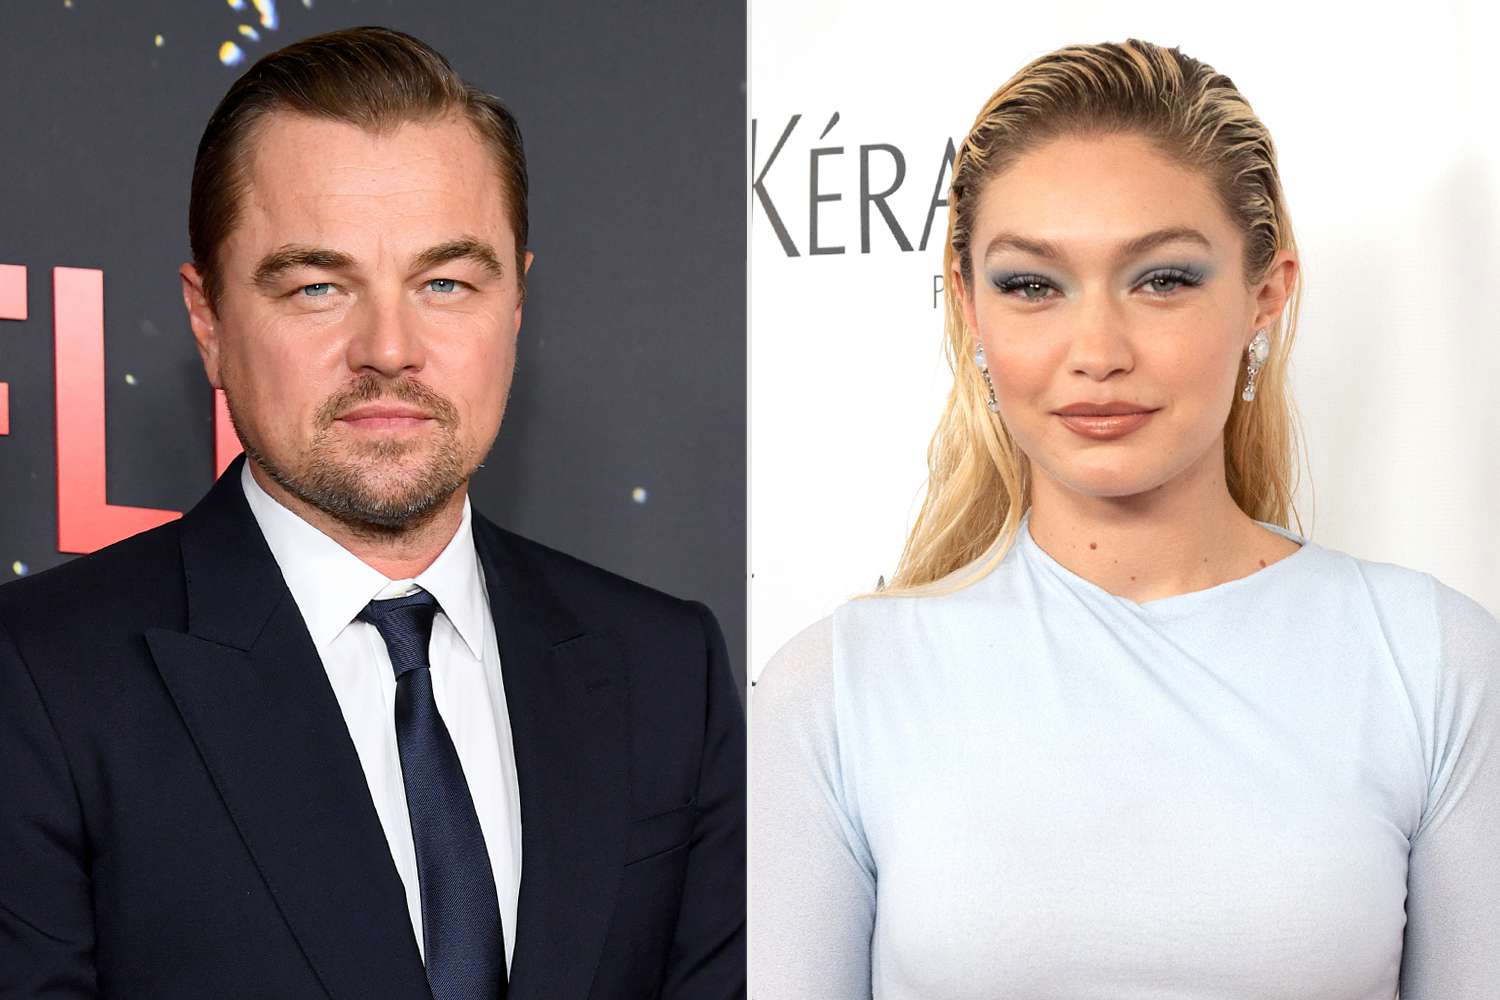 Leonardo Di Caprio and Gigi Hadid: Navigating Their Open Relationship Speculations Claims with a Casual Mindset (Credits: People)